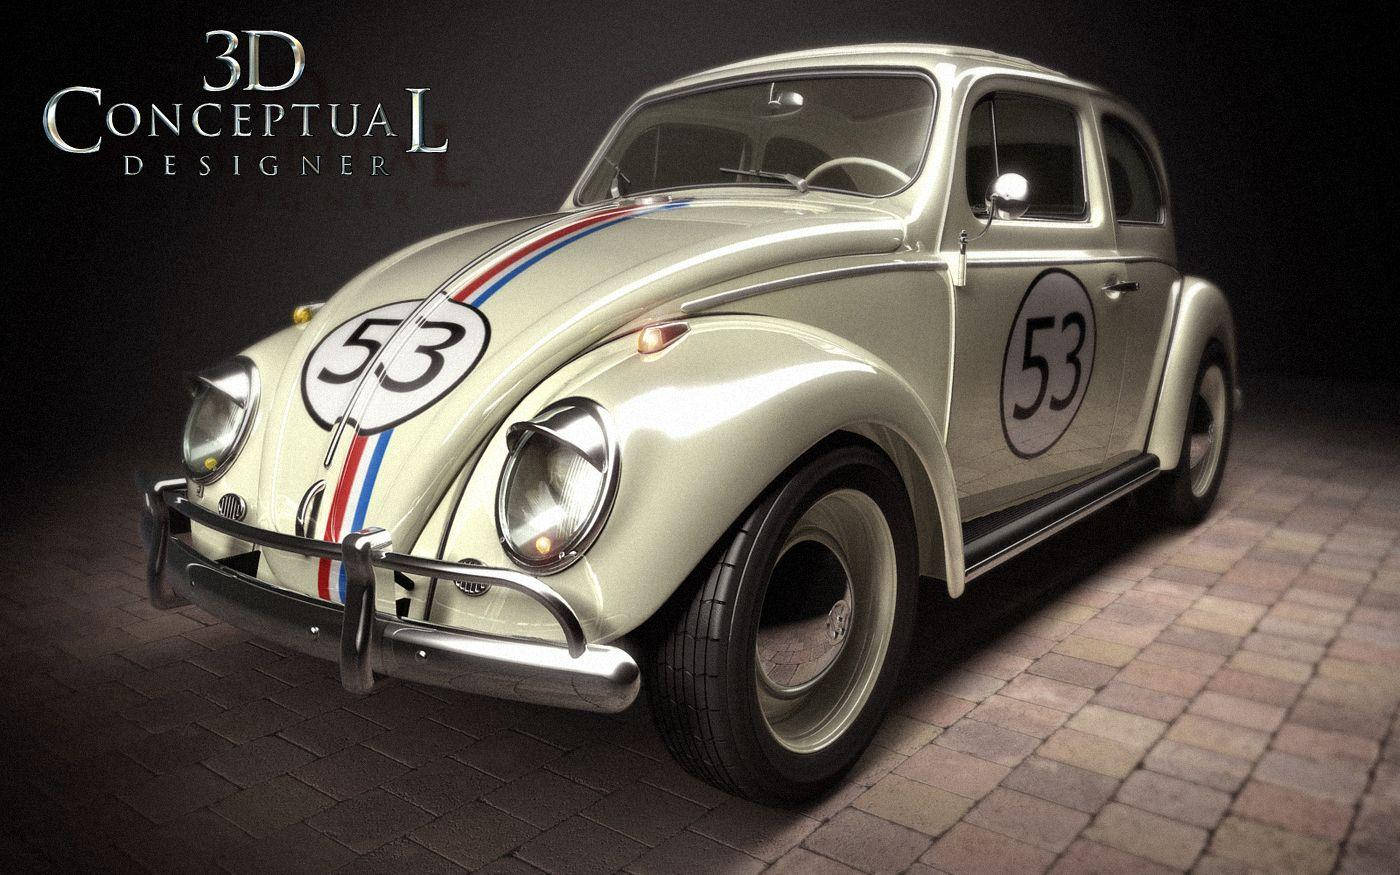 Herbie Fully Loaded 3d Conceptual Design Background